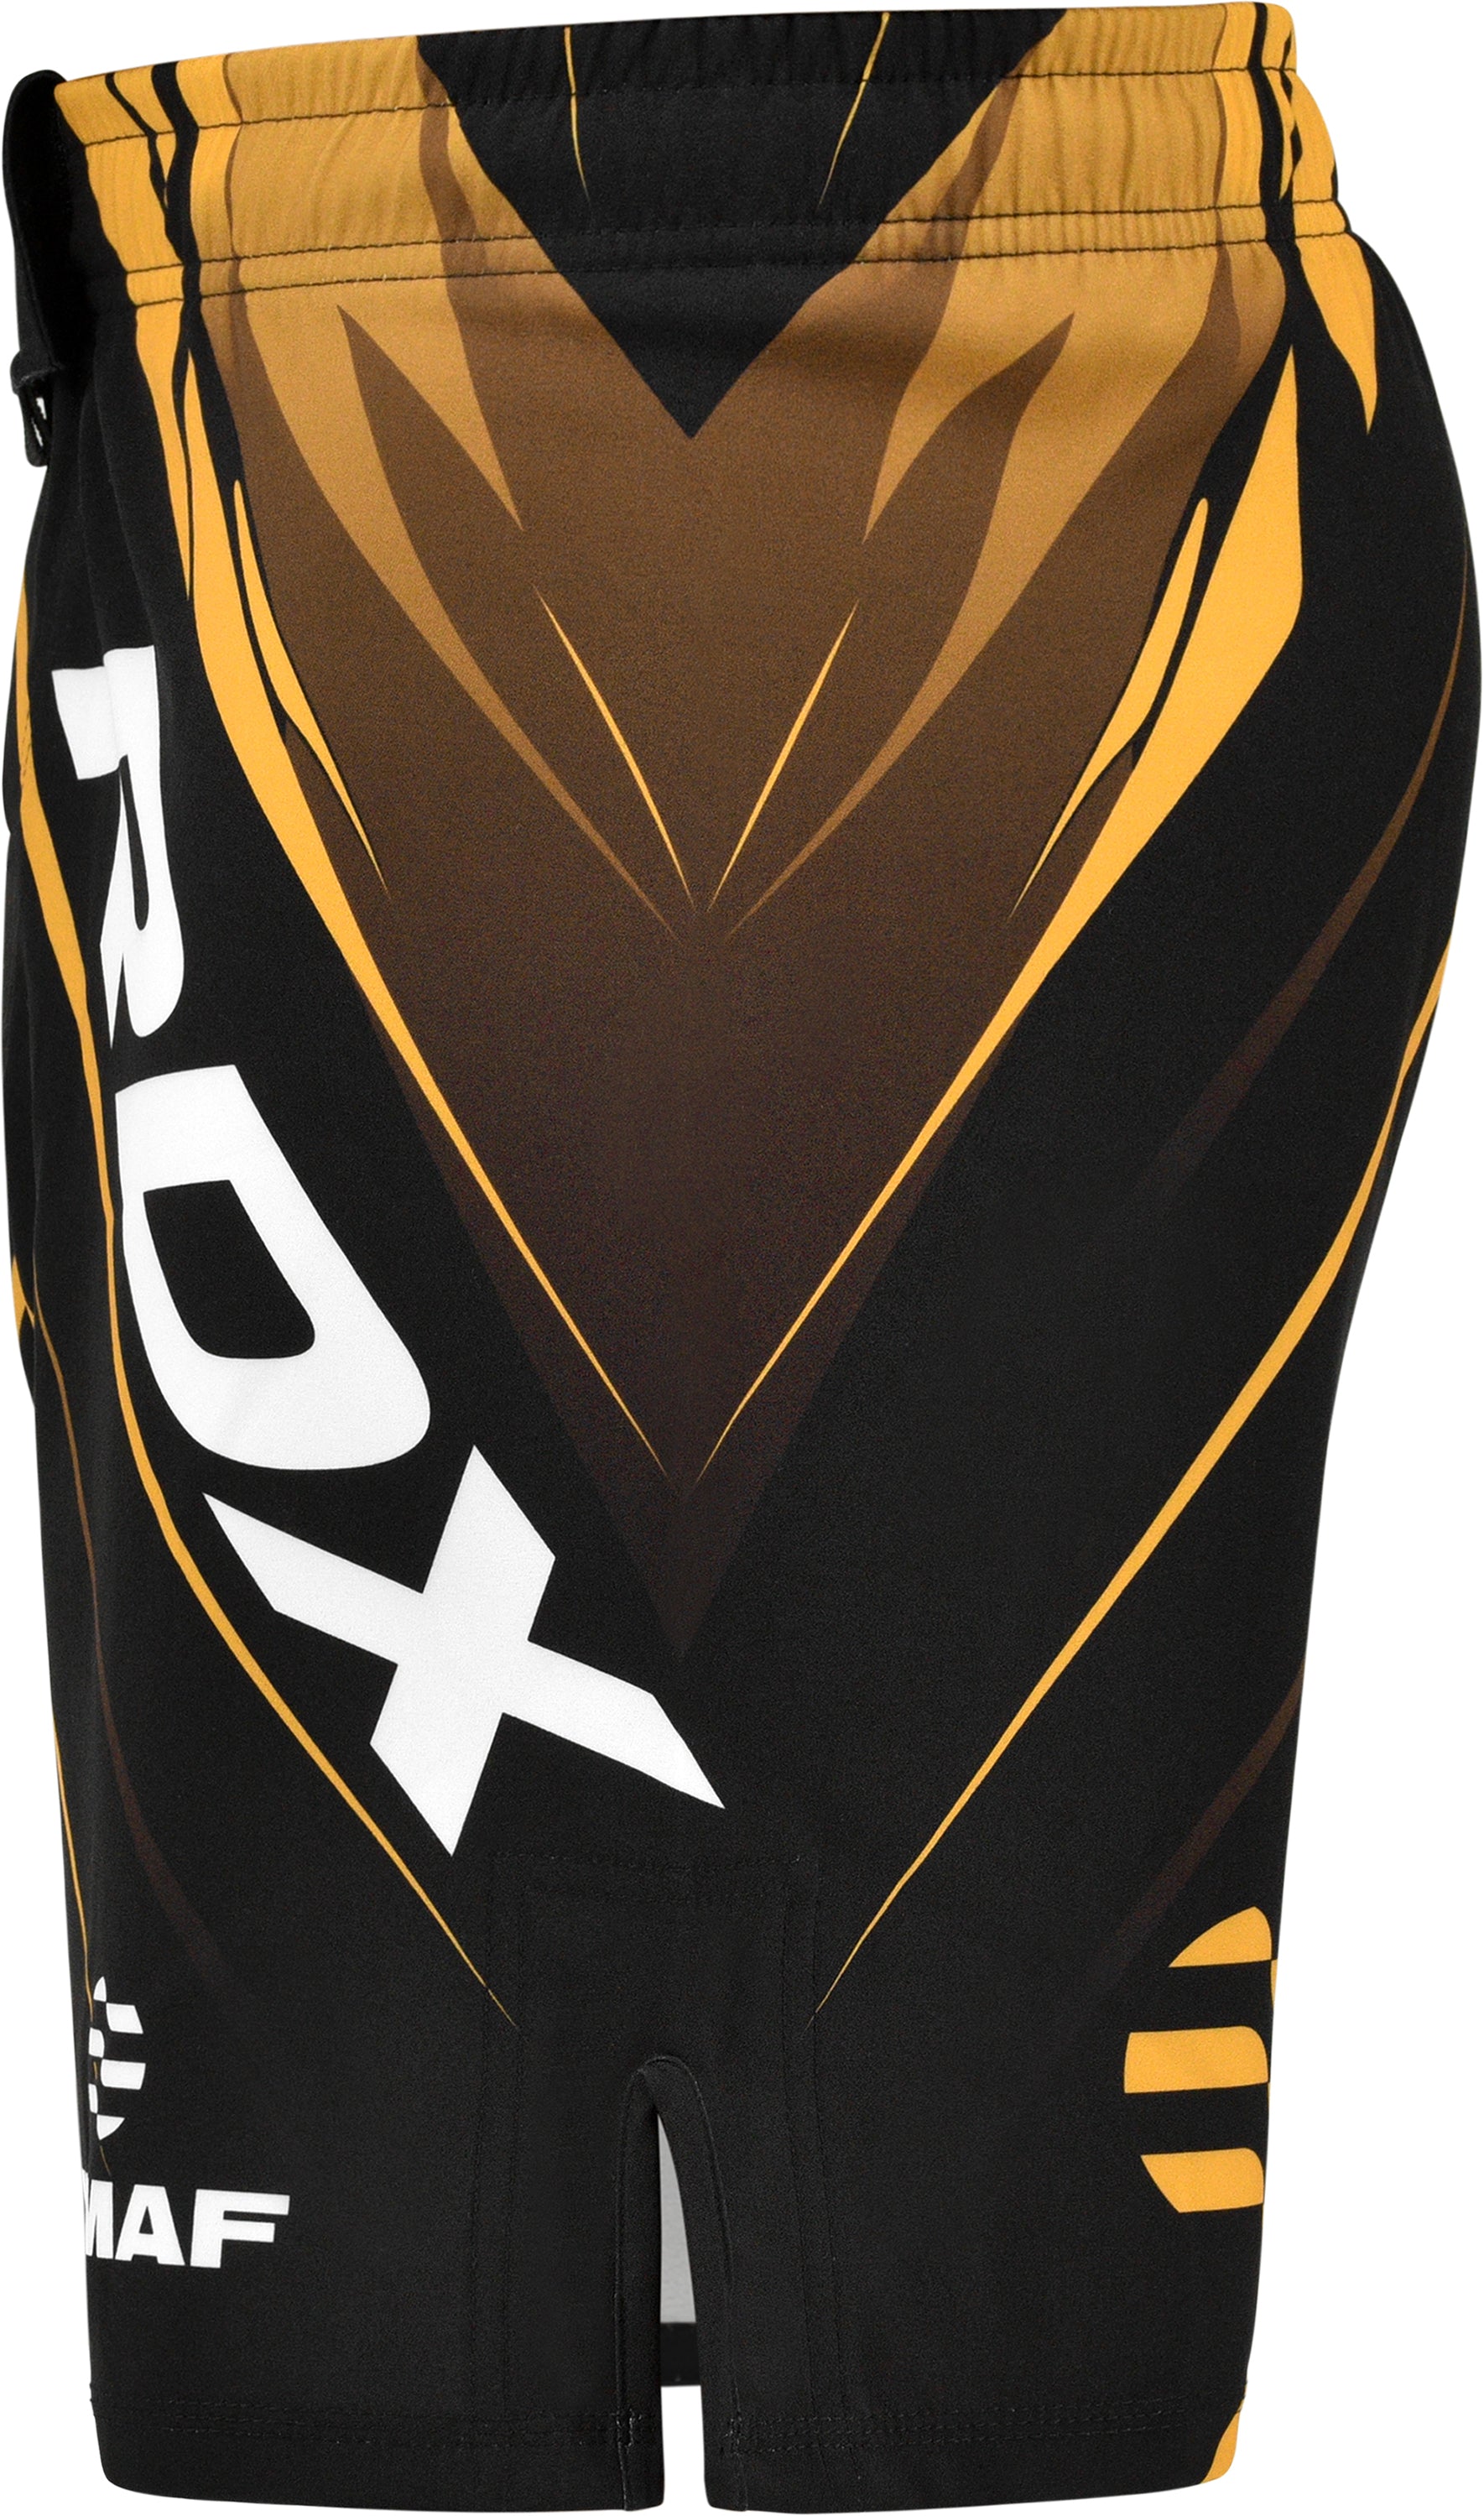 RDX IMMAF Approved MMA Fight & Training Shorts GOLDEN